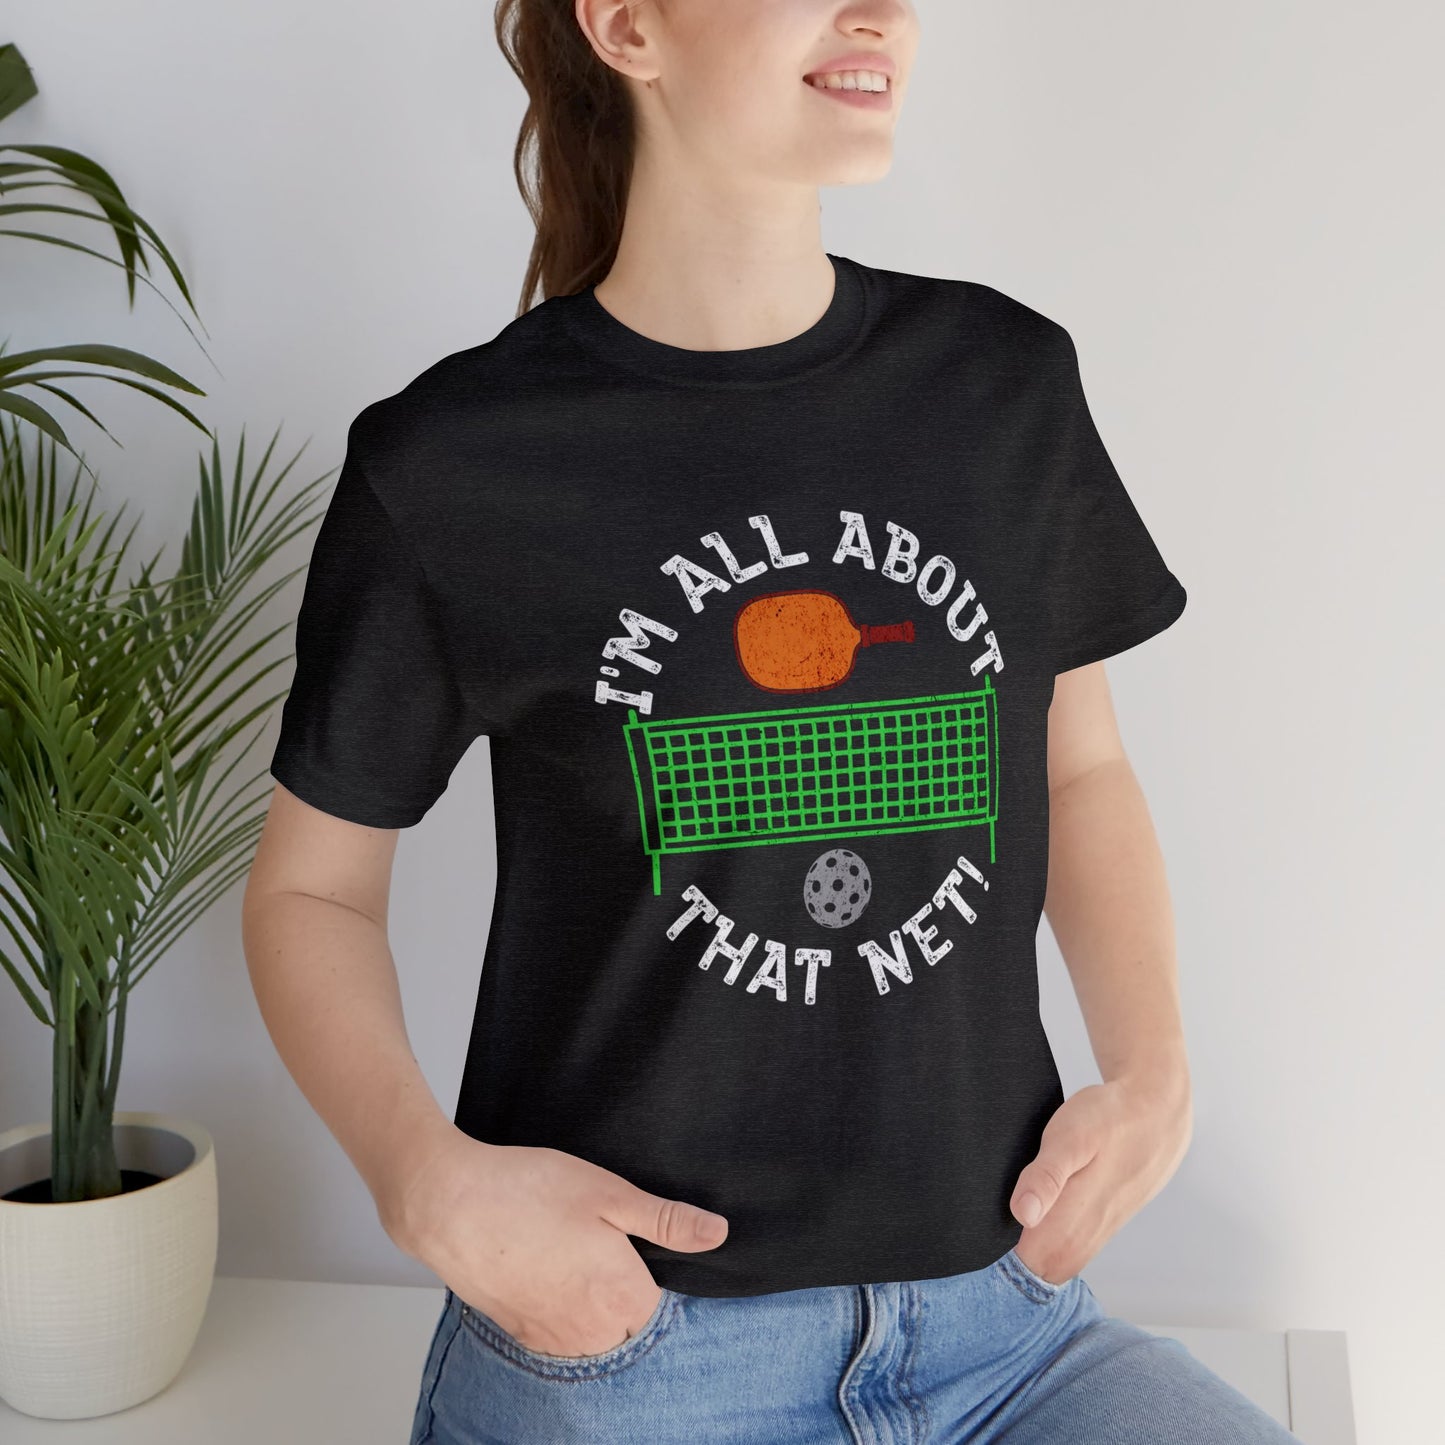 All About That Net - Pickleball Enthusiast's Shirt